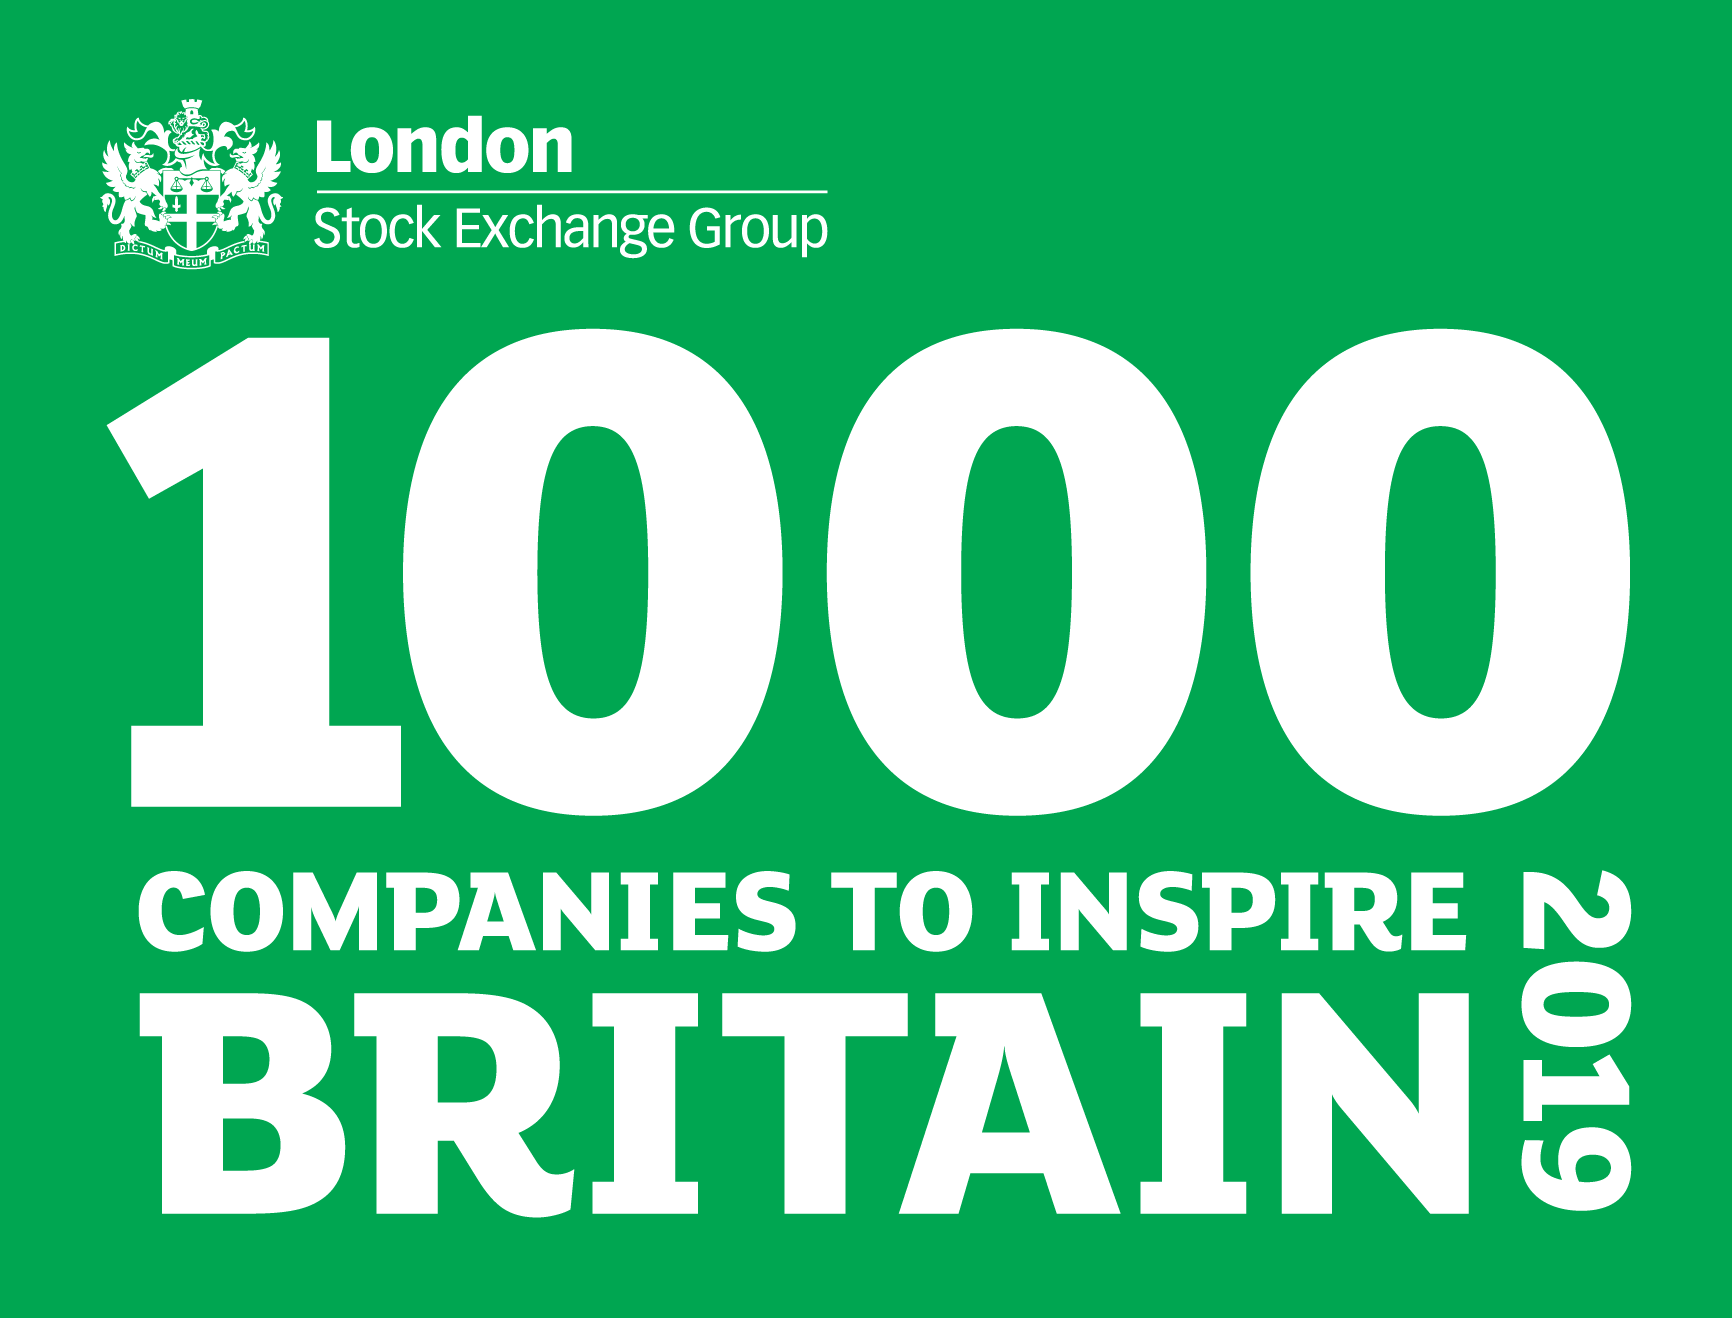 DC Norris Recognized on London Stock Exchange 2019 List of 1000 Companies to Inspire Britain